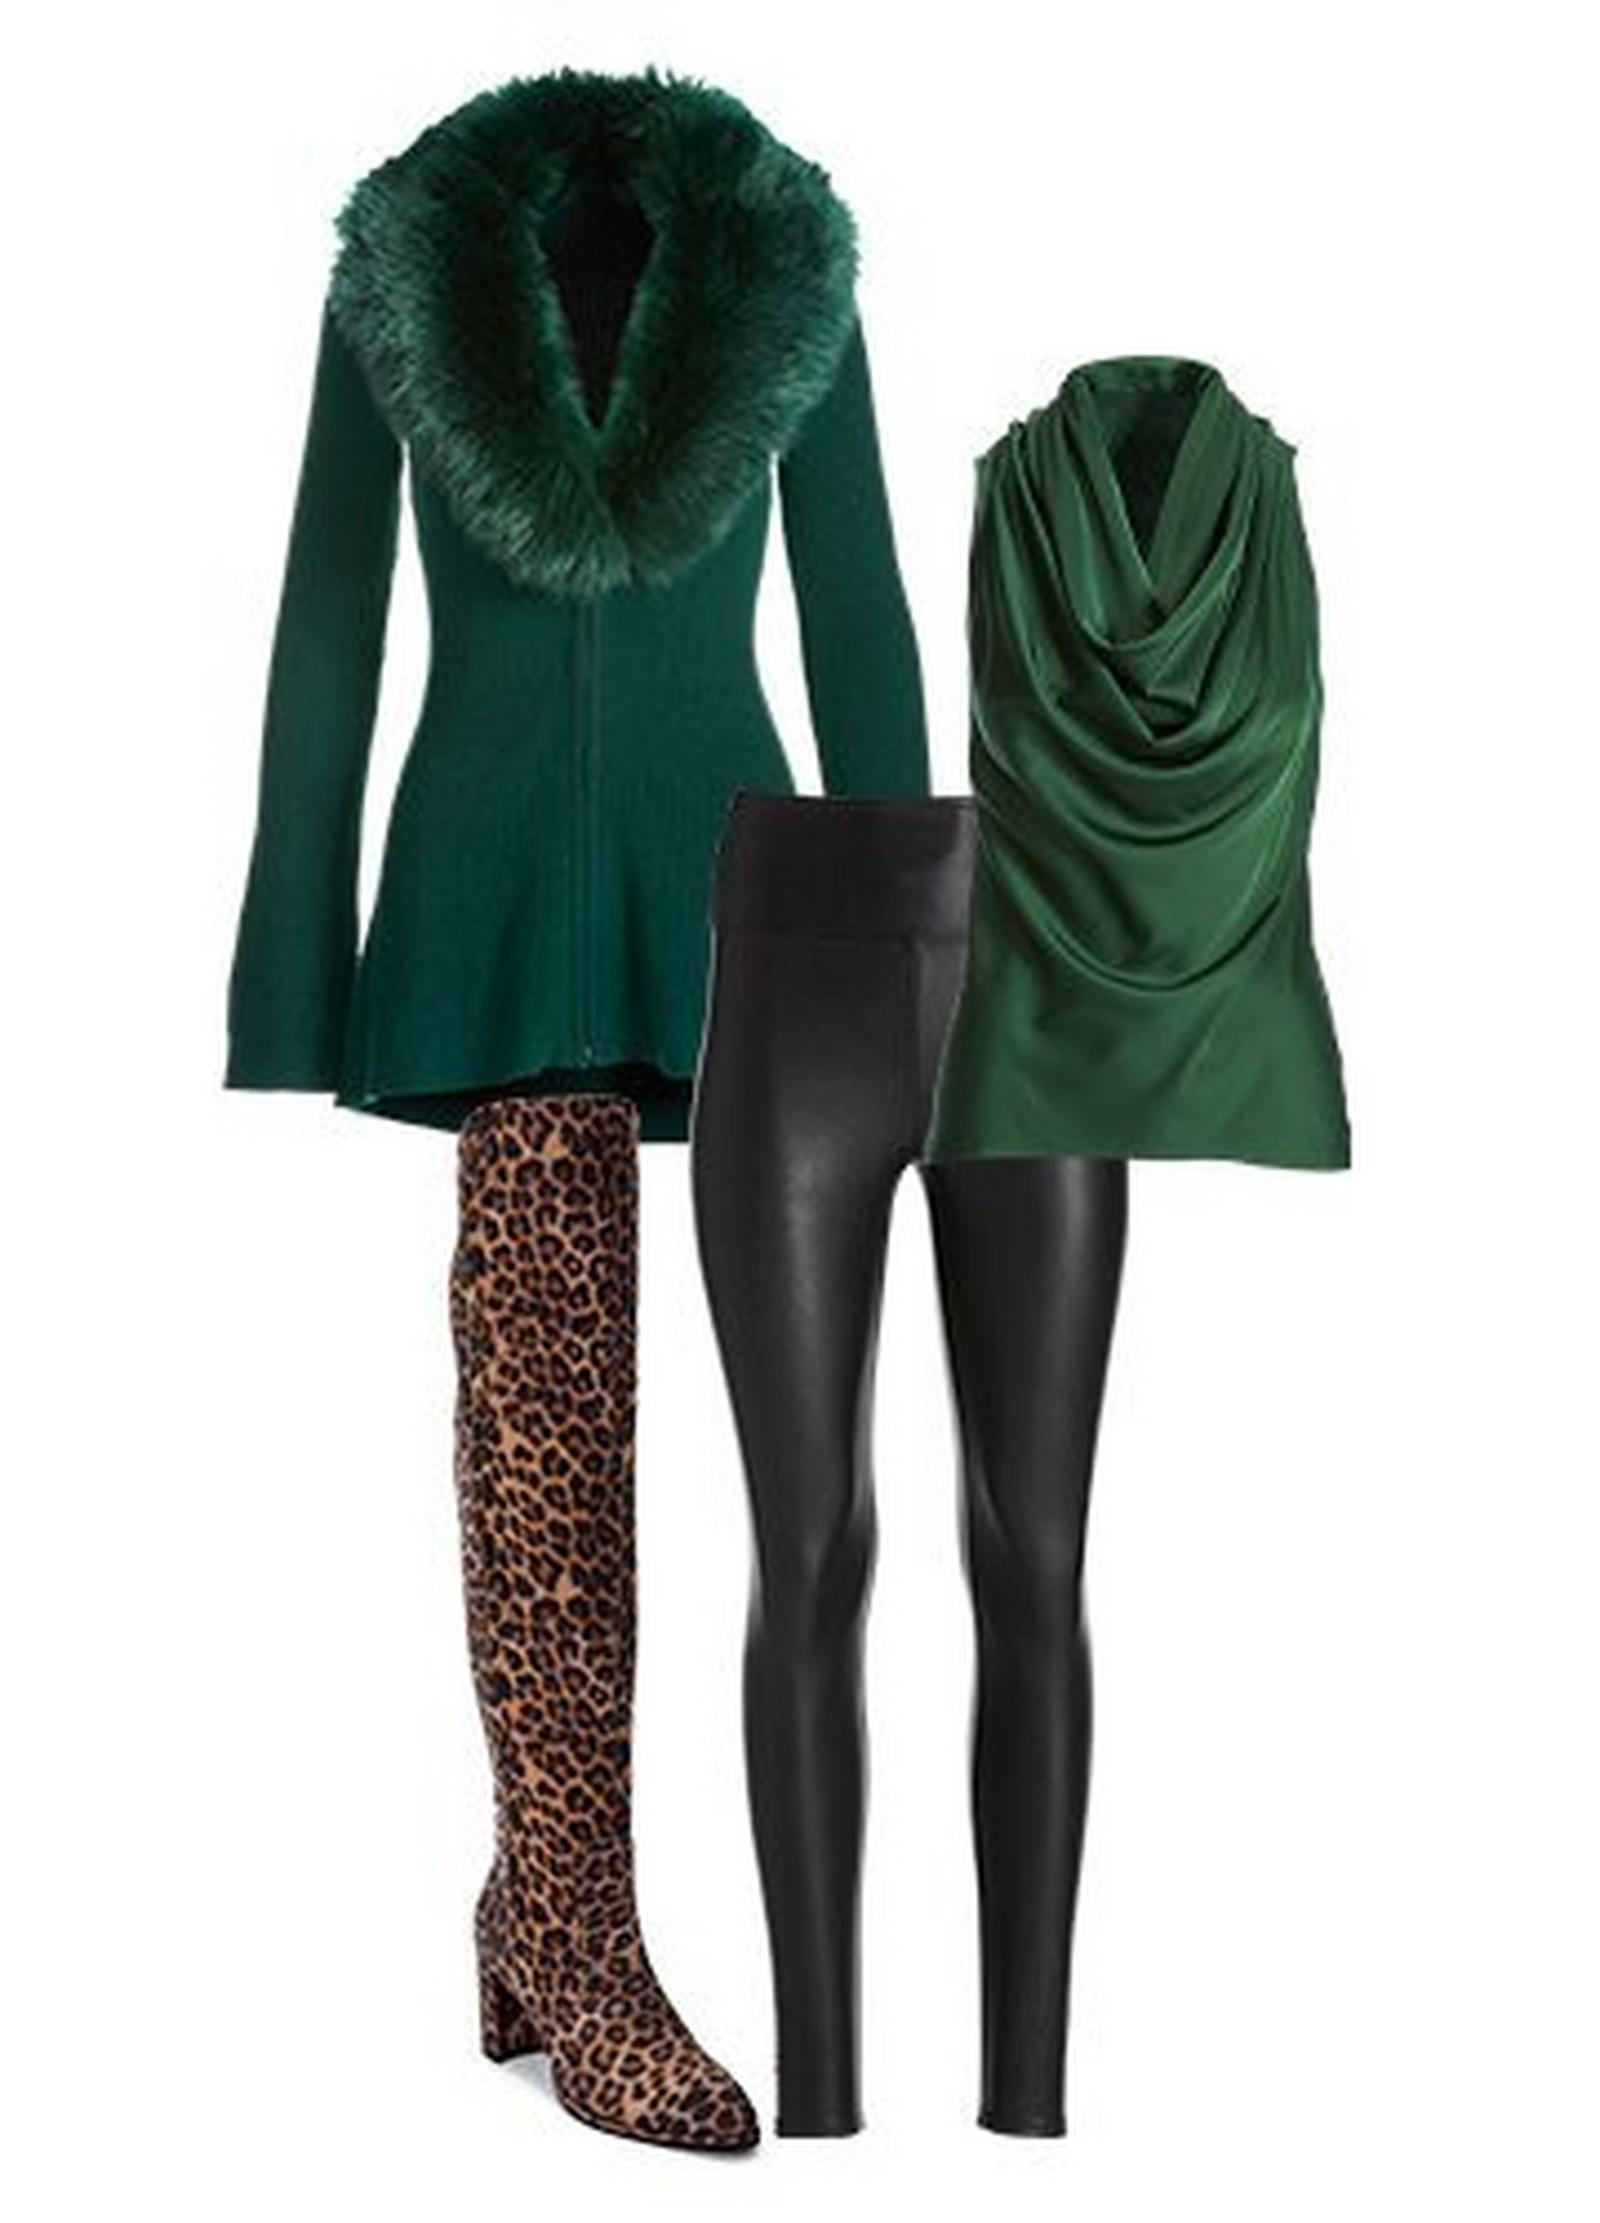 green faux-fur ribbed cardigan, black faux-leather leggings, green cowl neck sleeveless charmeuse blouse, and leopard print over-the-knee boots.